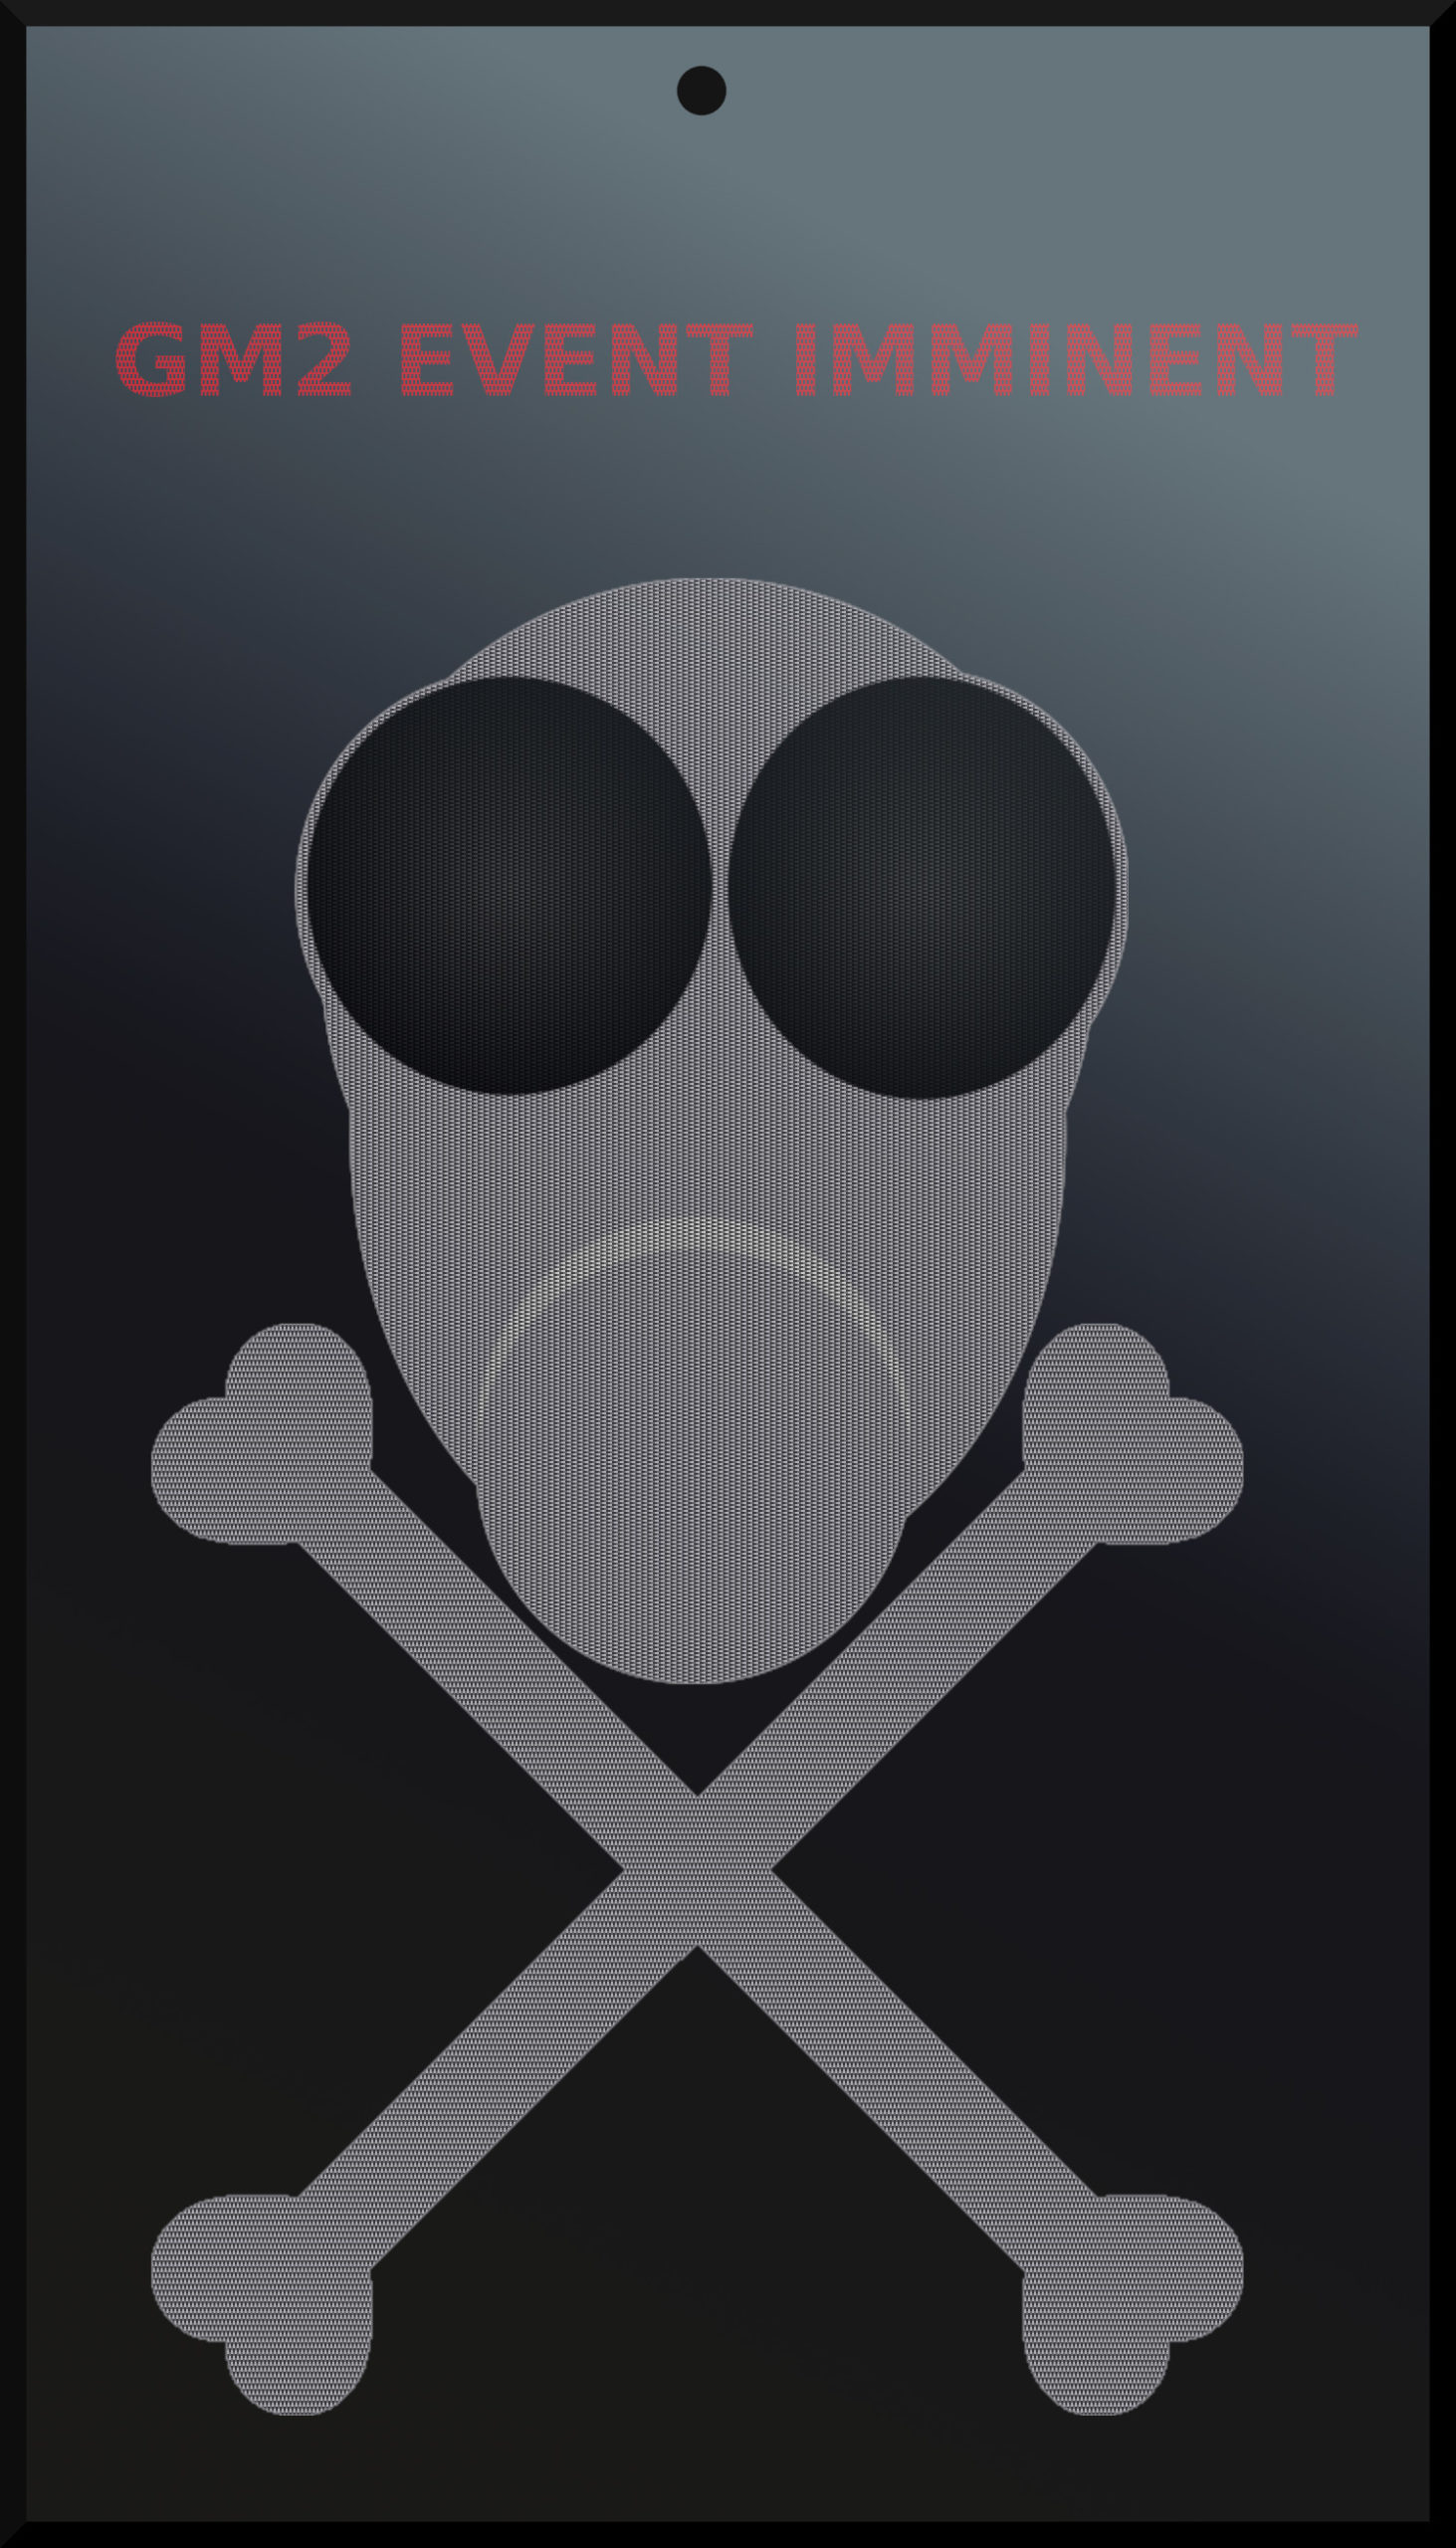 White gas mask with white crossed bones beneath it on a mobile phone screen